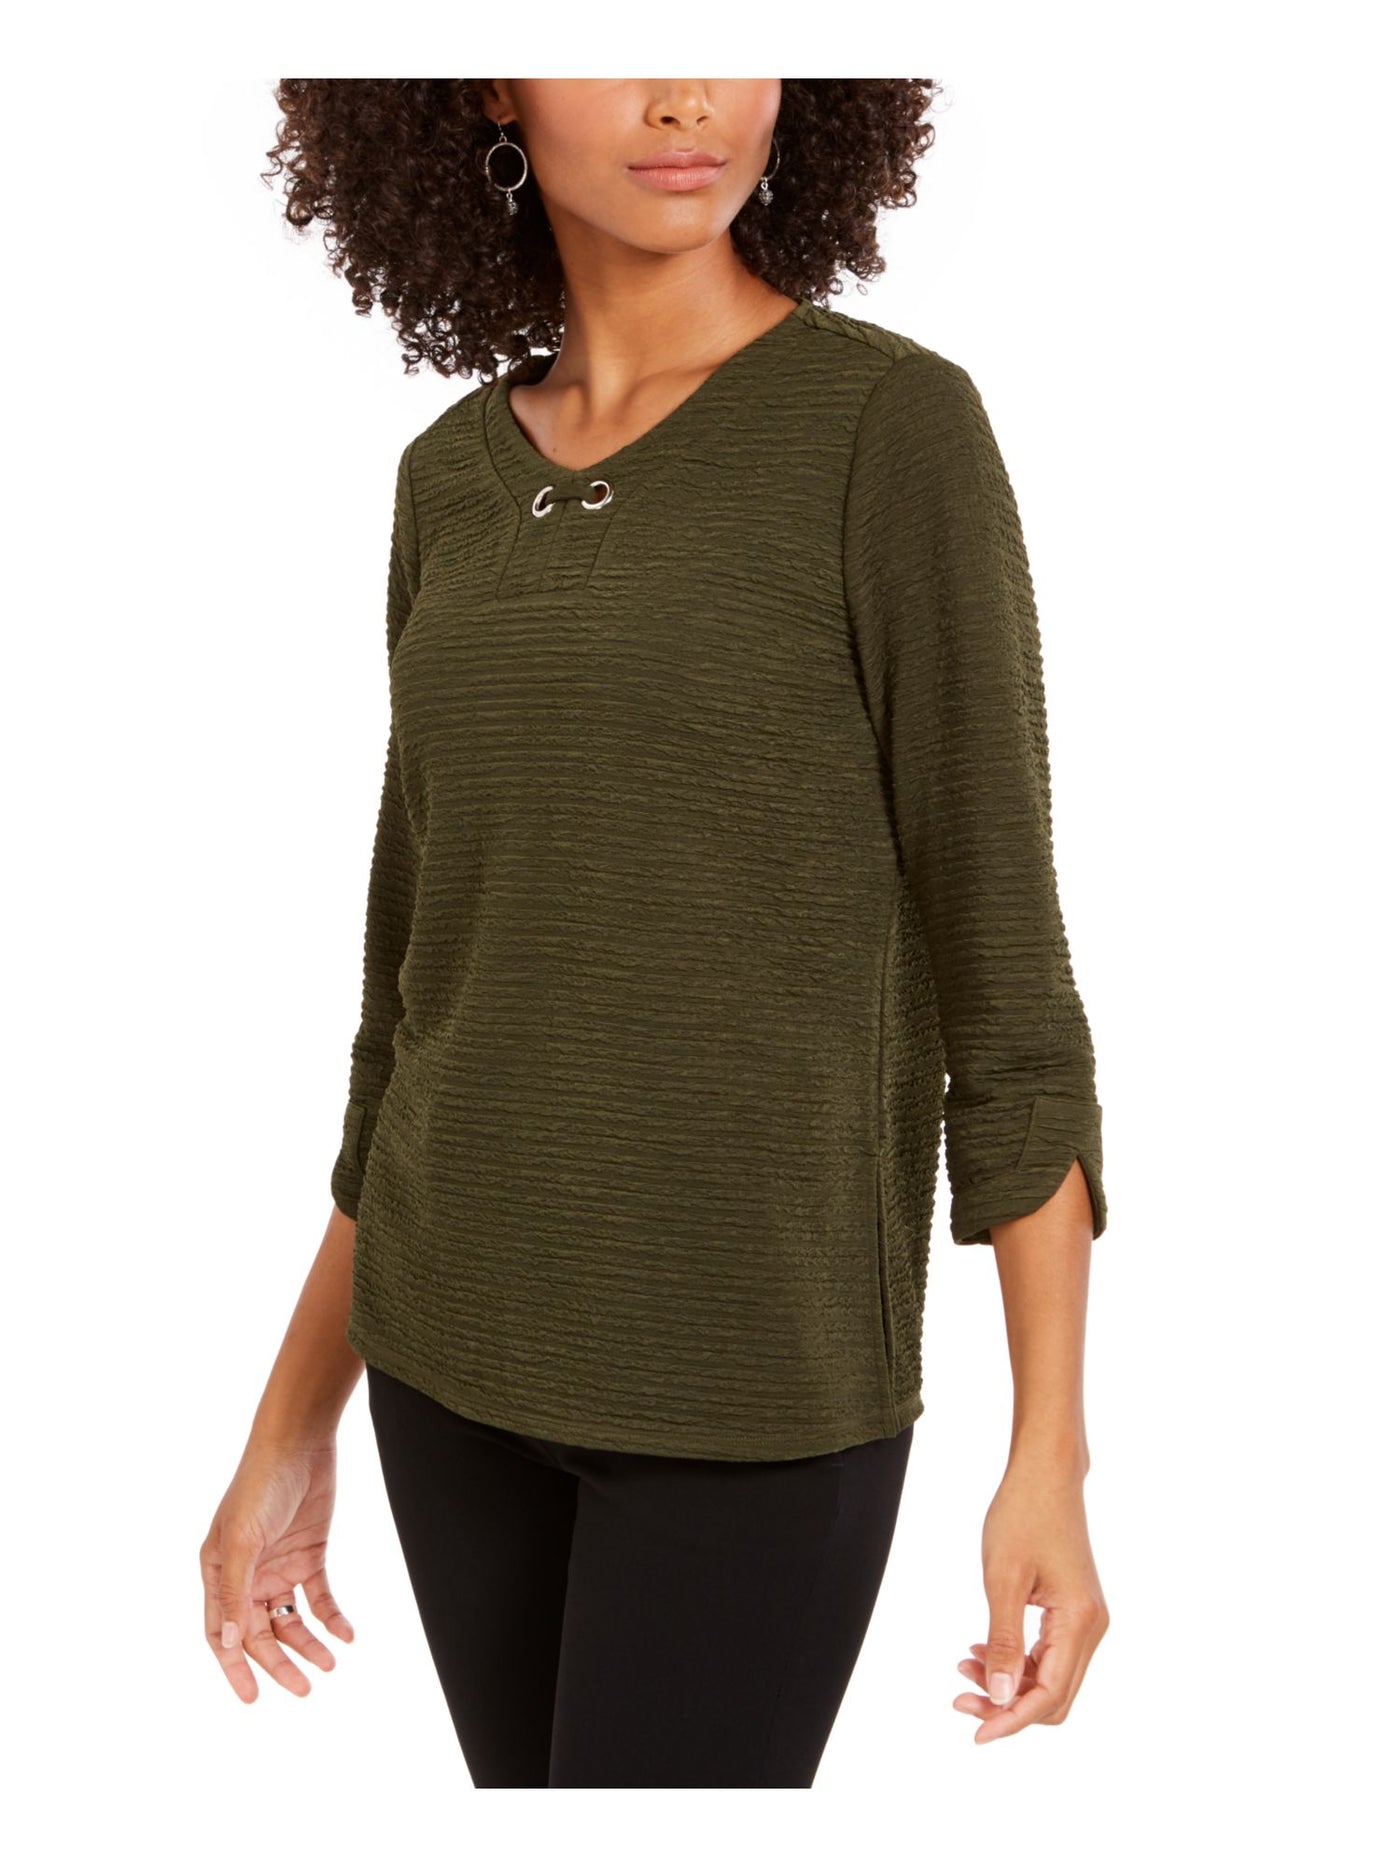 NY COLLECTION Womens Green Printed 3/4 Sleeve Jewel Neck Top Petites PXS